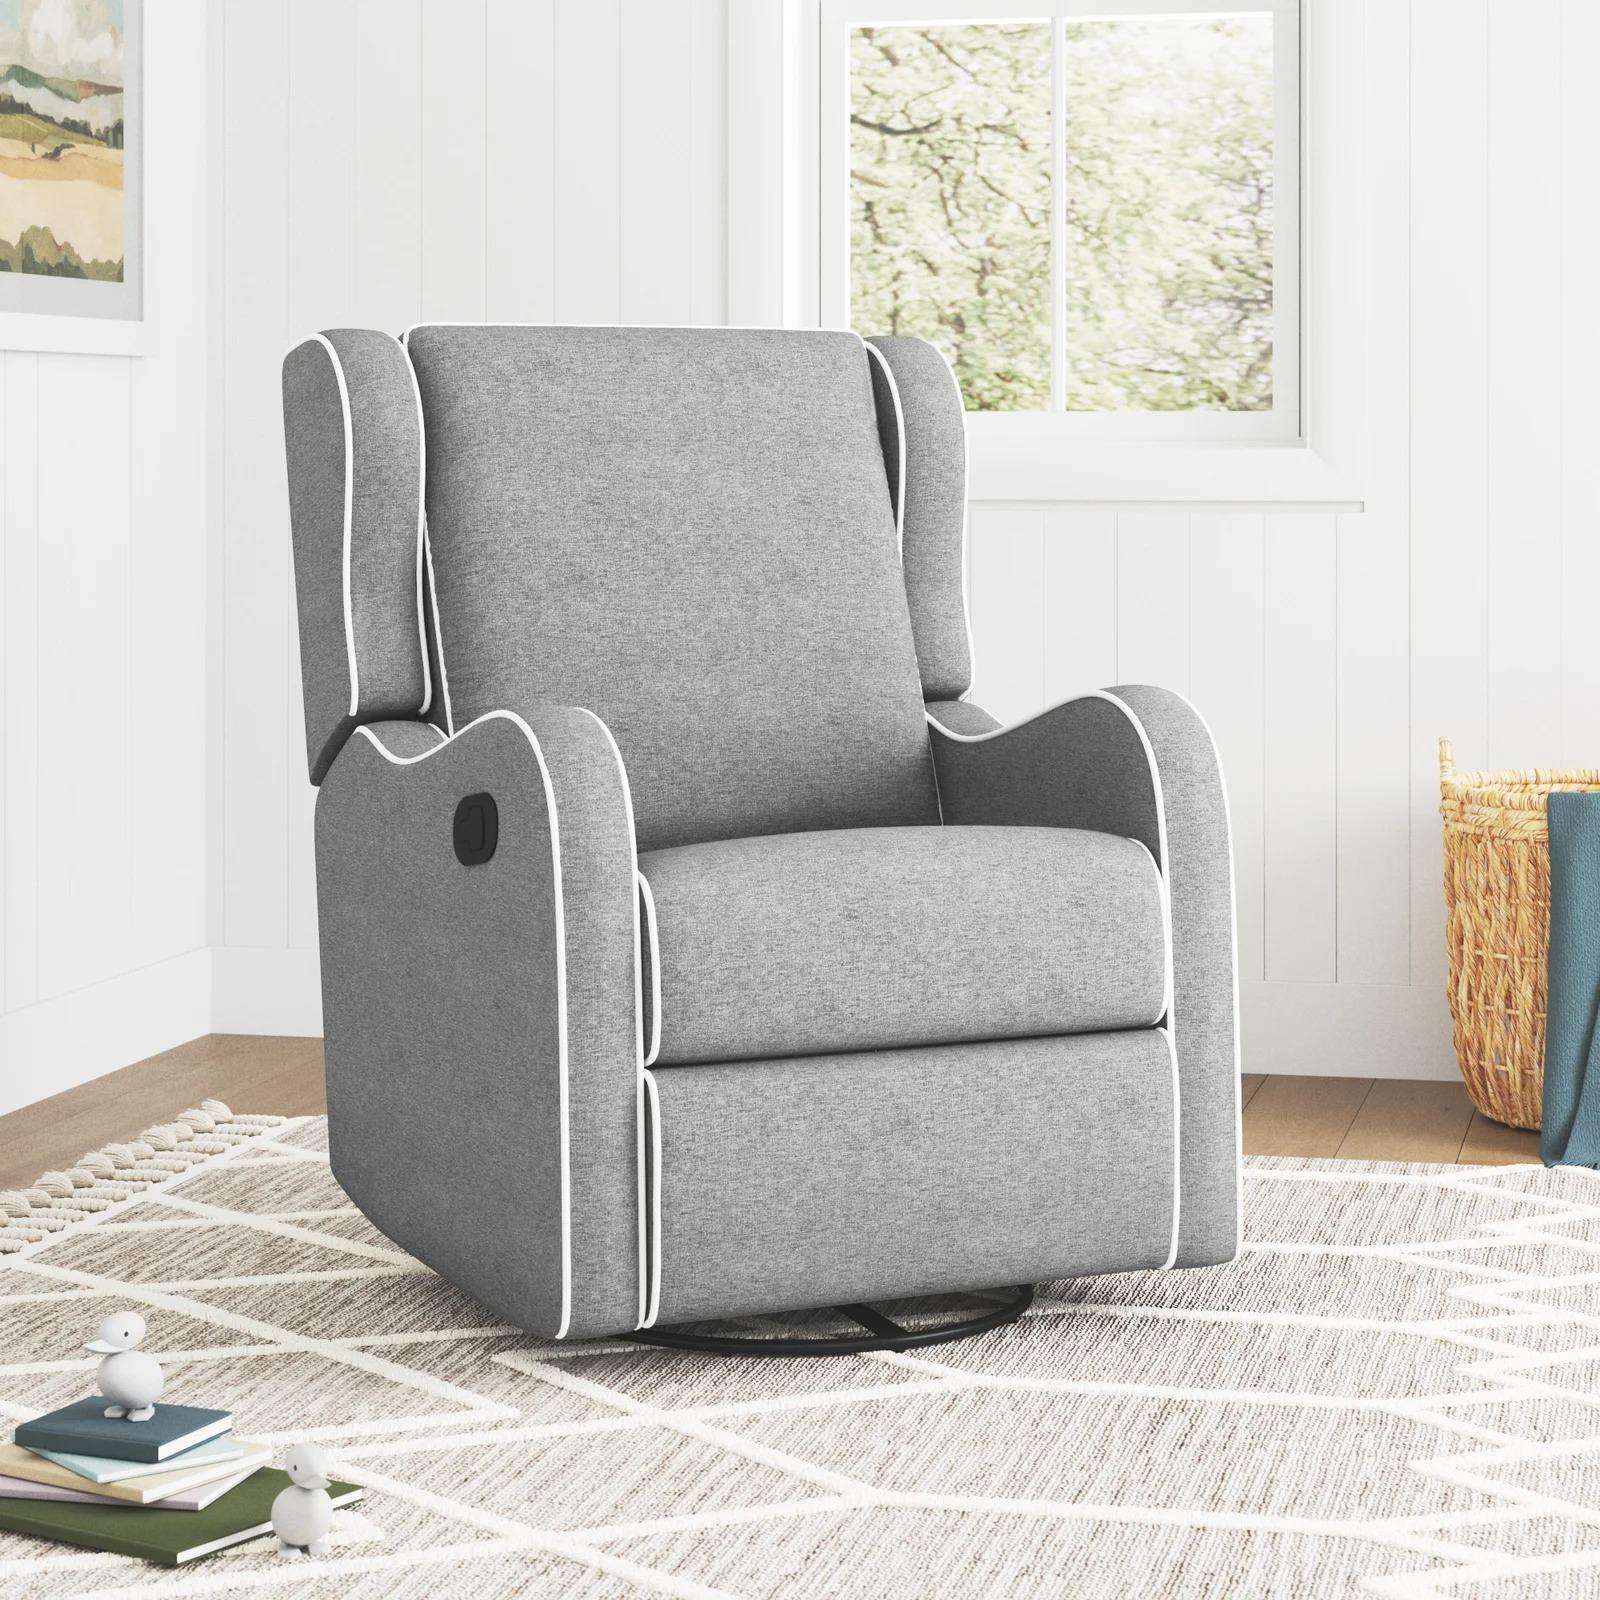 Right now, you can bring home the Maison faux leather recliner for $315.99 instead of $1,019. 0ee86dee albie swivel glider recliner